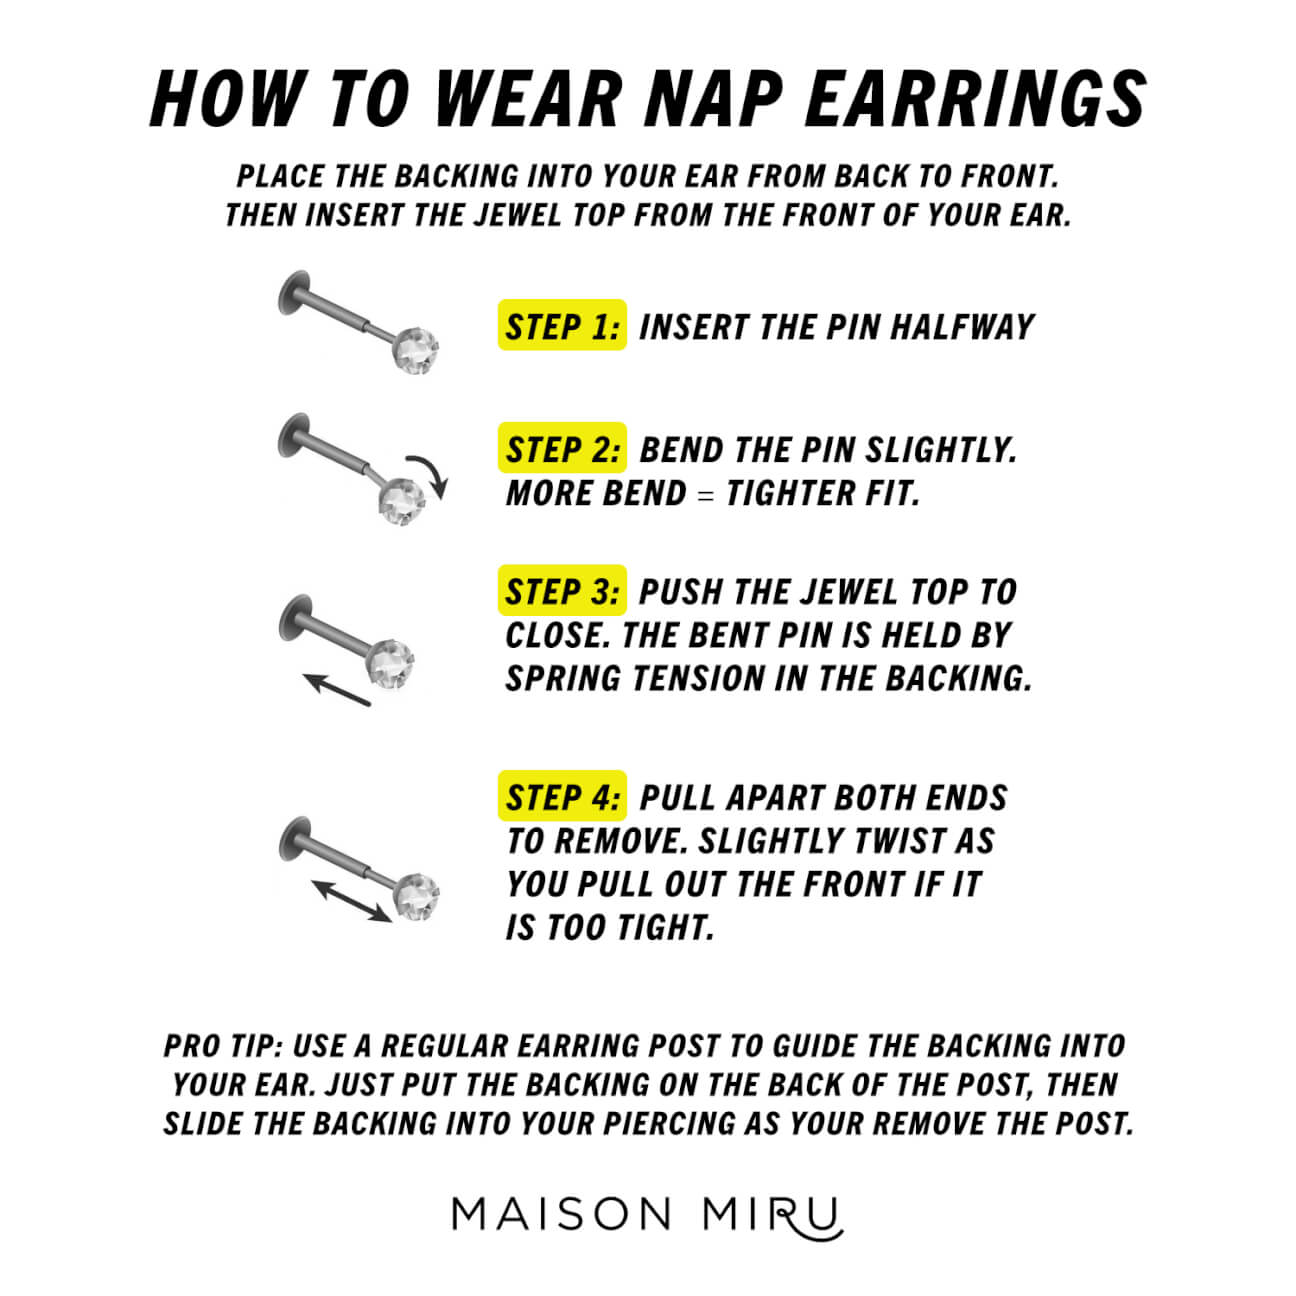 How to Wear the Bolt Nap Earrings